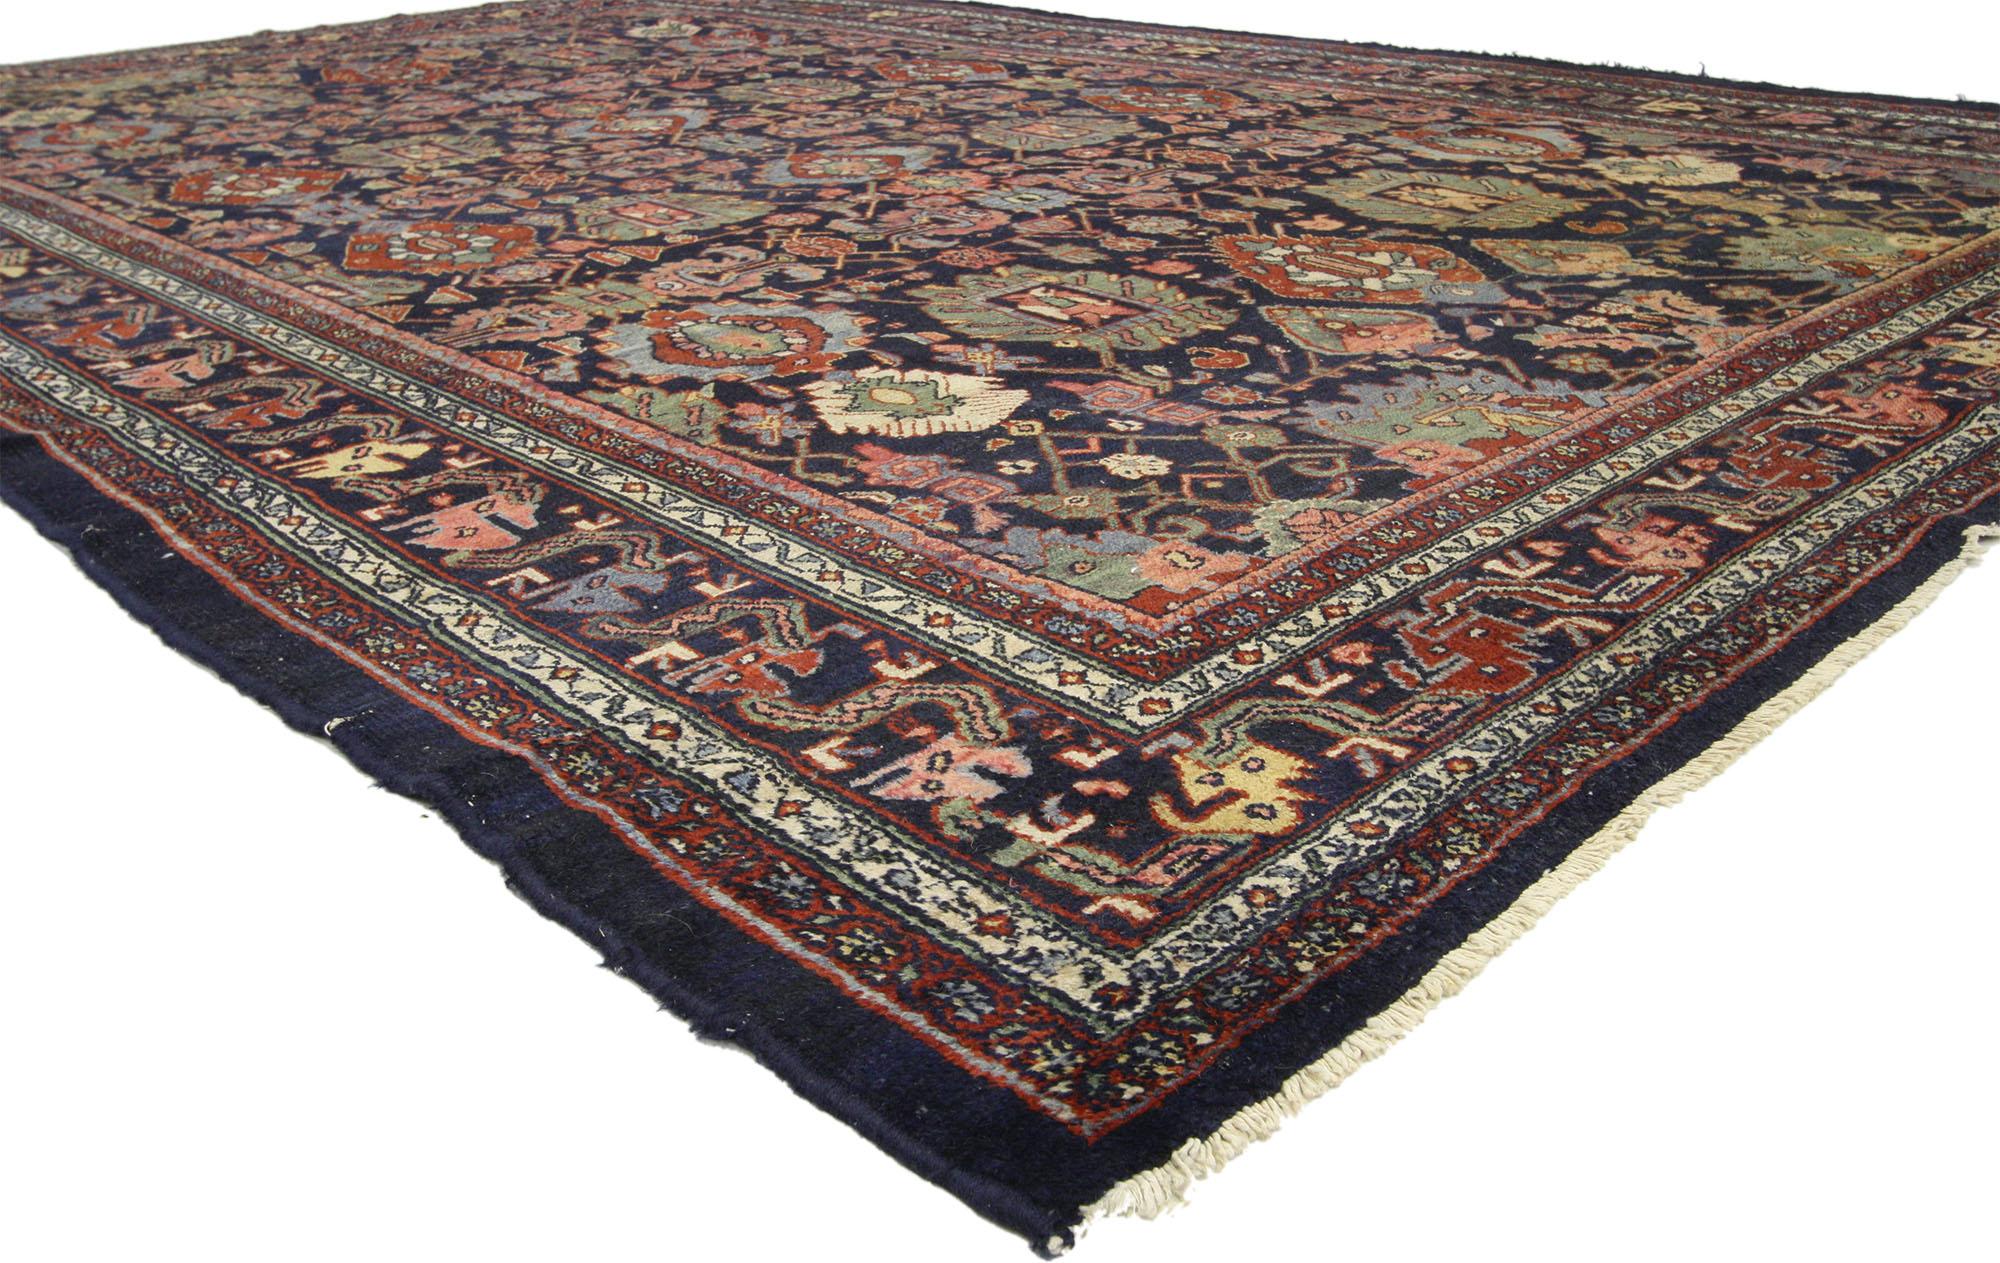 77160 Antique Persian Bibikabad Area Rug with Dragon Vine Border and Traditional Style 08’00 x 11’09 From Esmaili Rugs Collection. This antique Persian Bibikabad Rug with Traditional Style features an all-over geometric botanical pattern of large